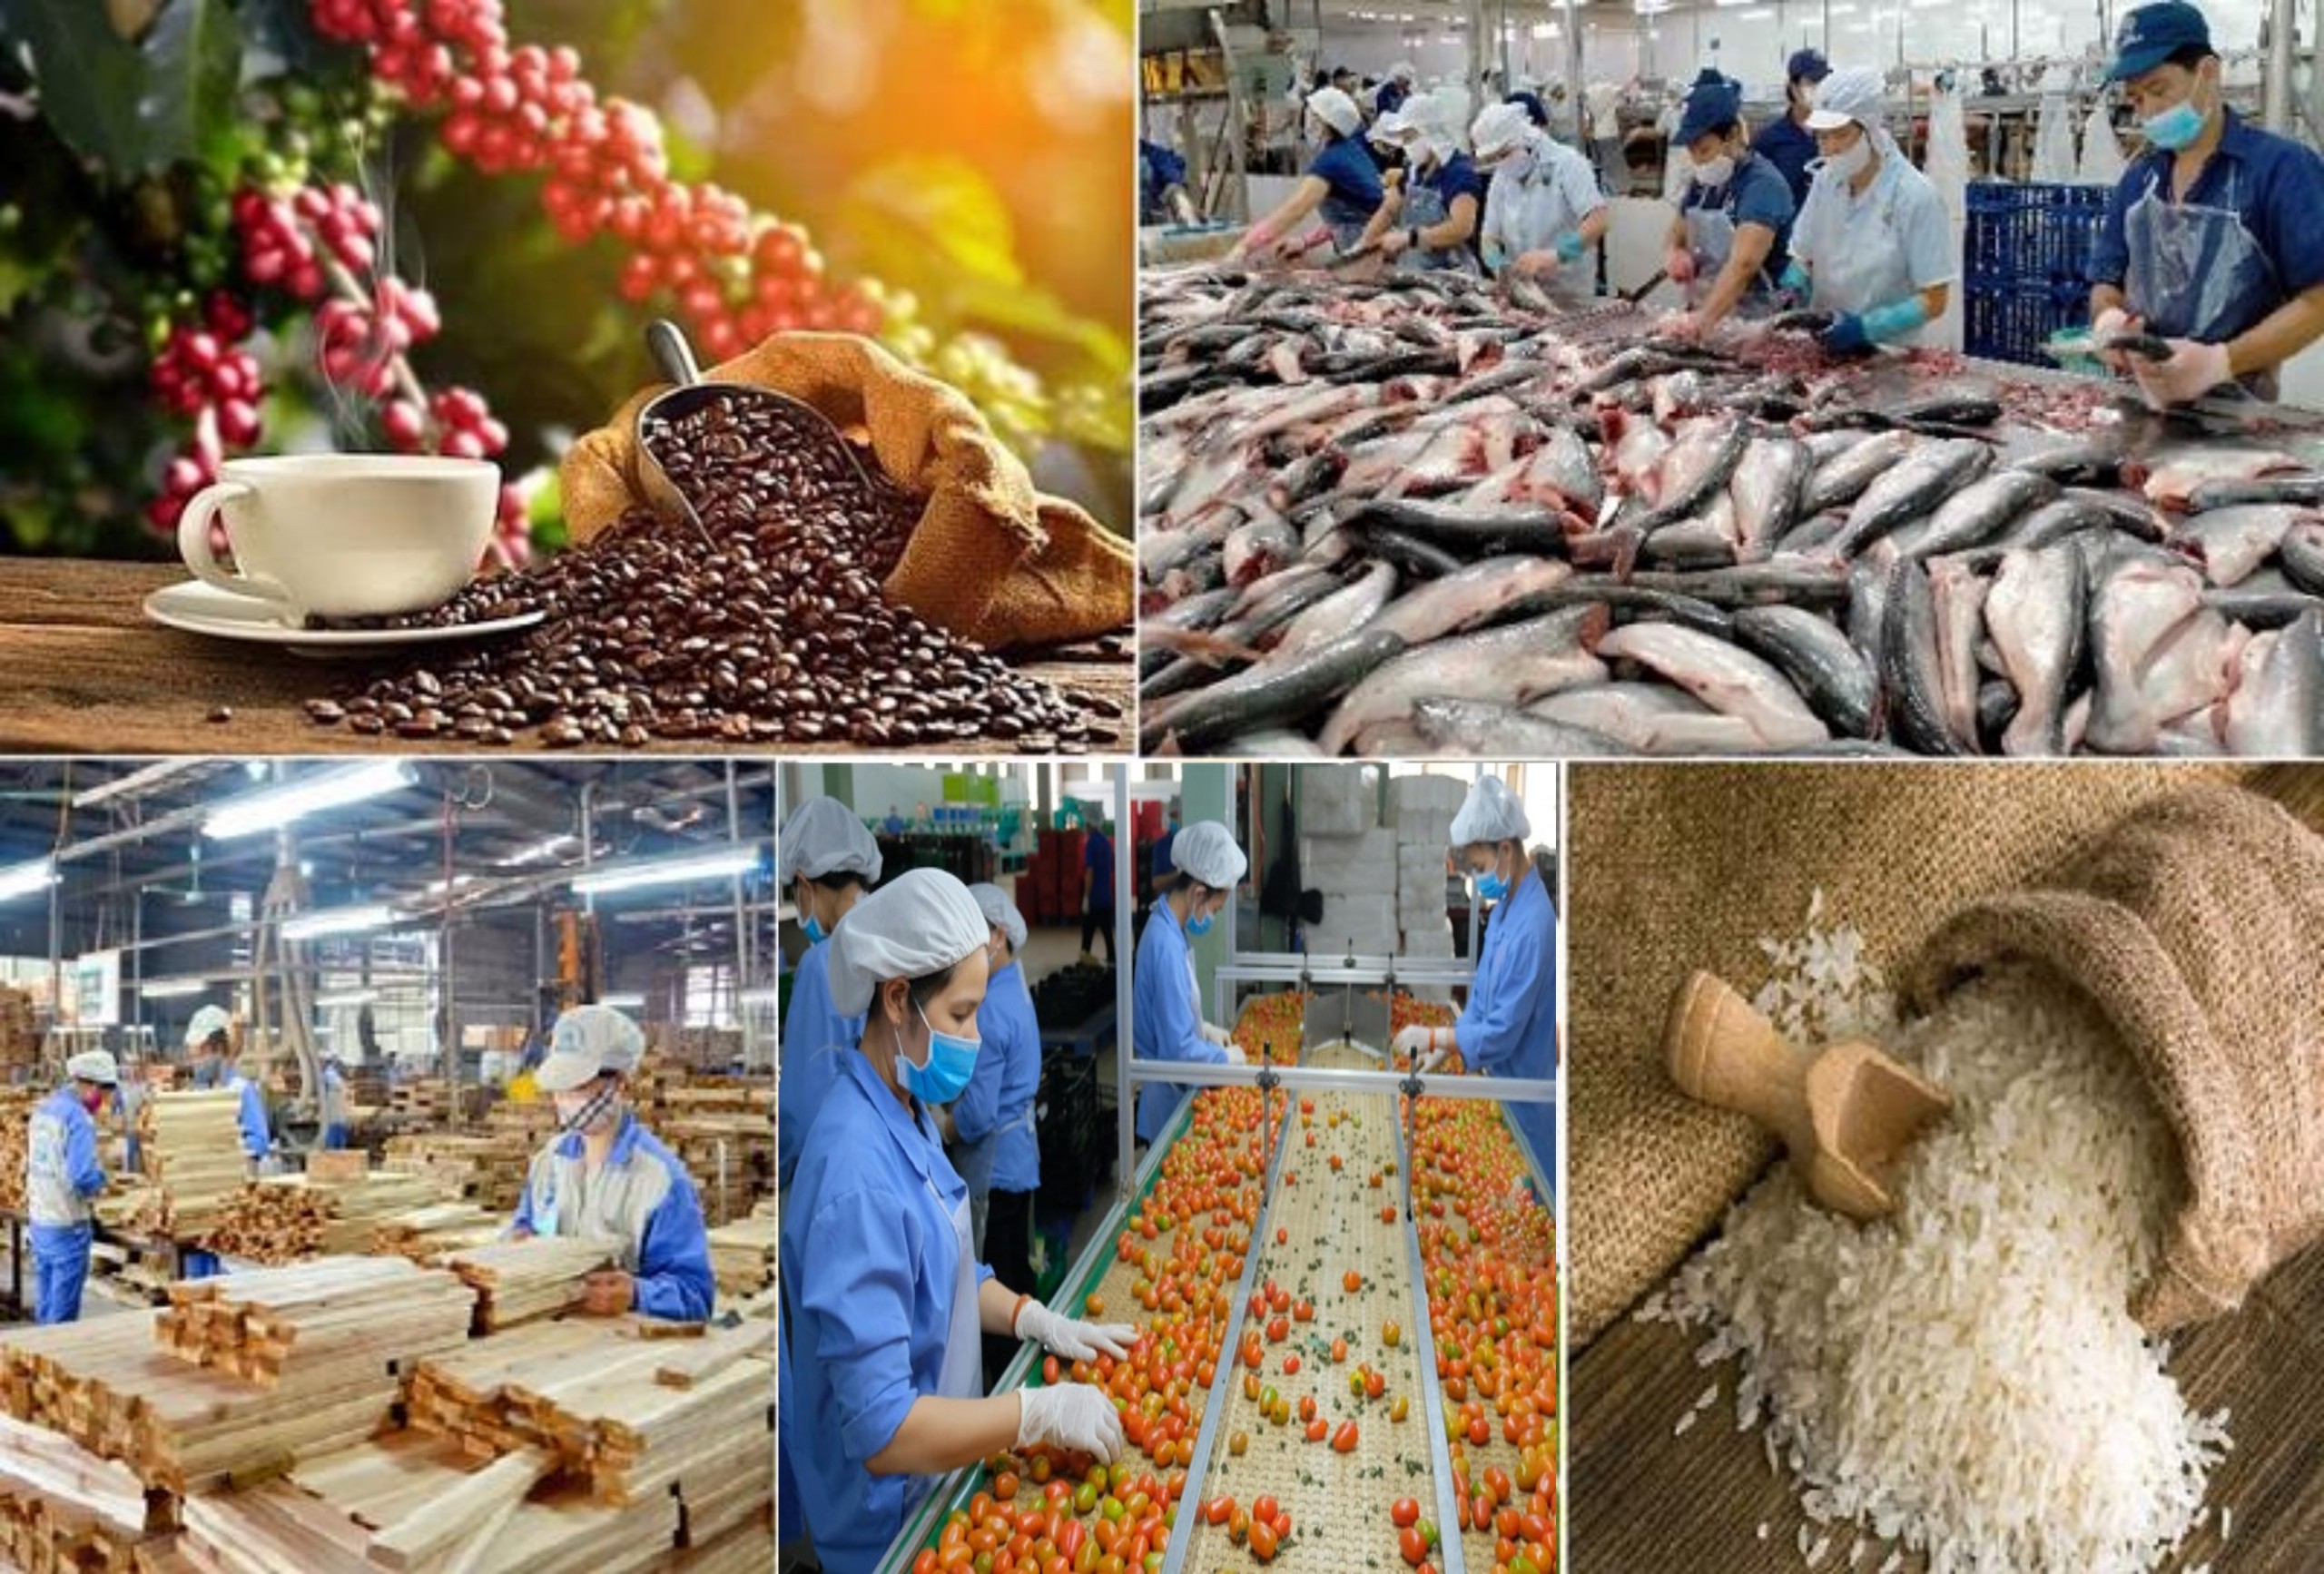 THE AGRICULTURAL SECTOR HAS 5 EXPORT COMMODDITY GROUPS OF MORE THAN BILLION USD AFTER 2.5 MONTHS